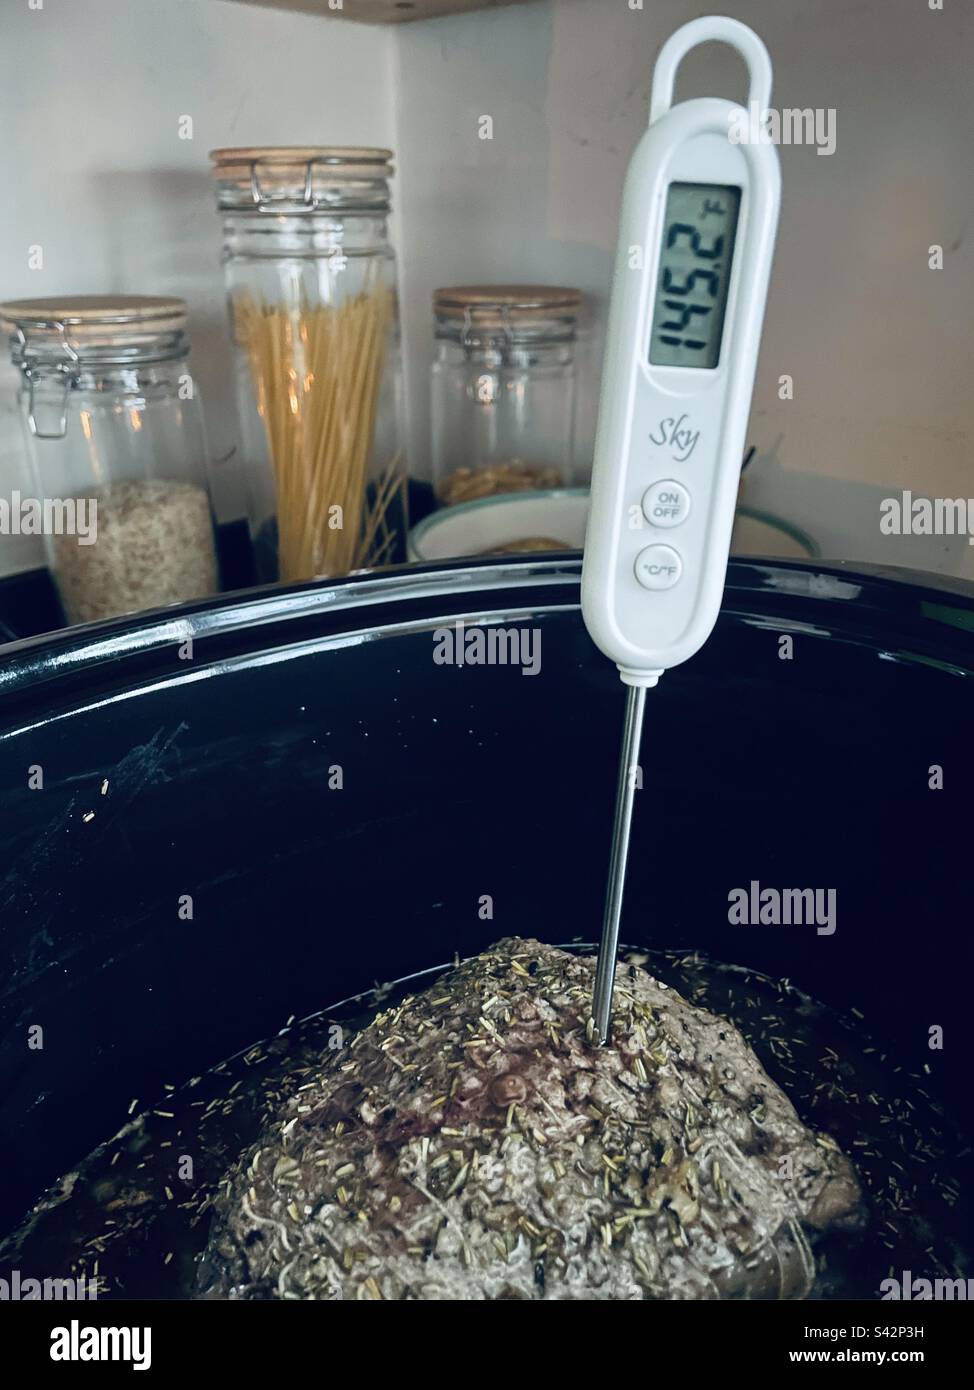 https://c8.alamy.com/comp/S42P3H/checking-the-internal-temperature-of-a-joint-of-slow-roast-beef-S42P3H.jpg